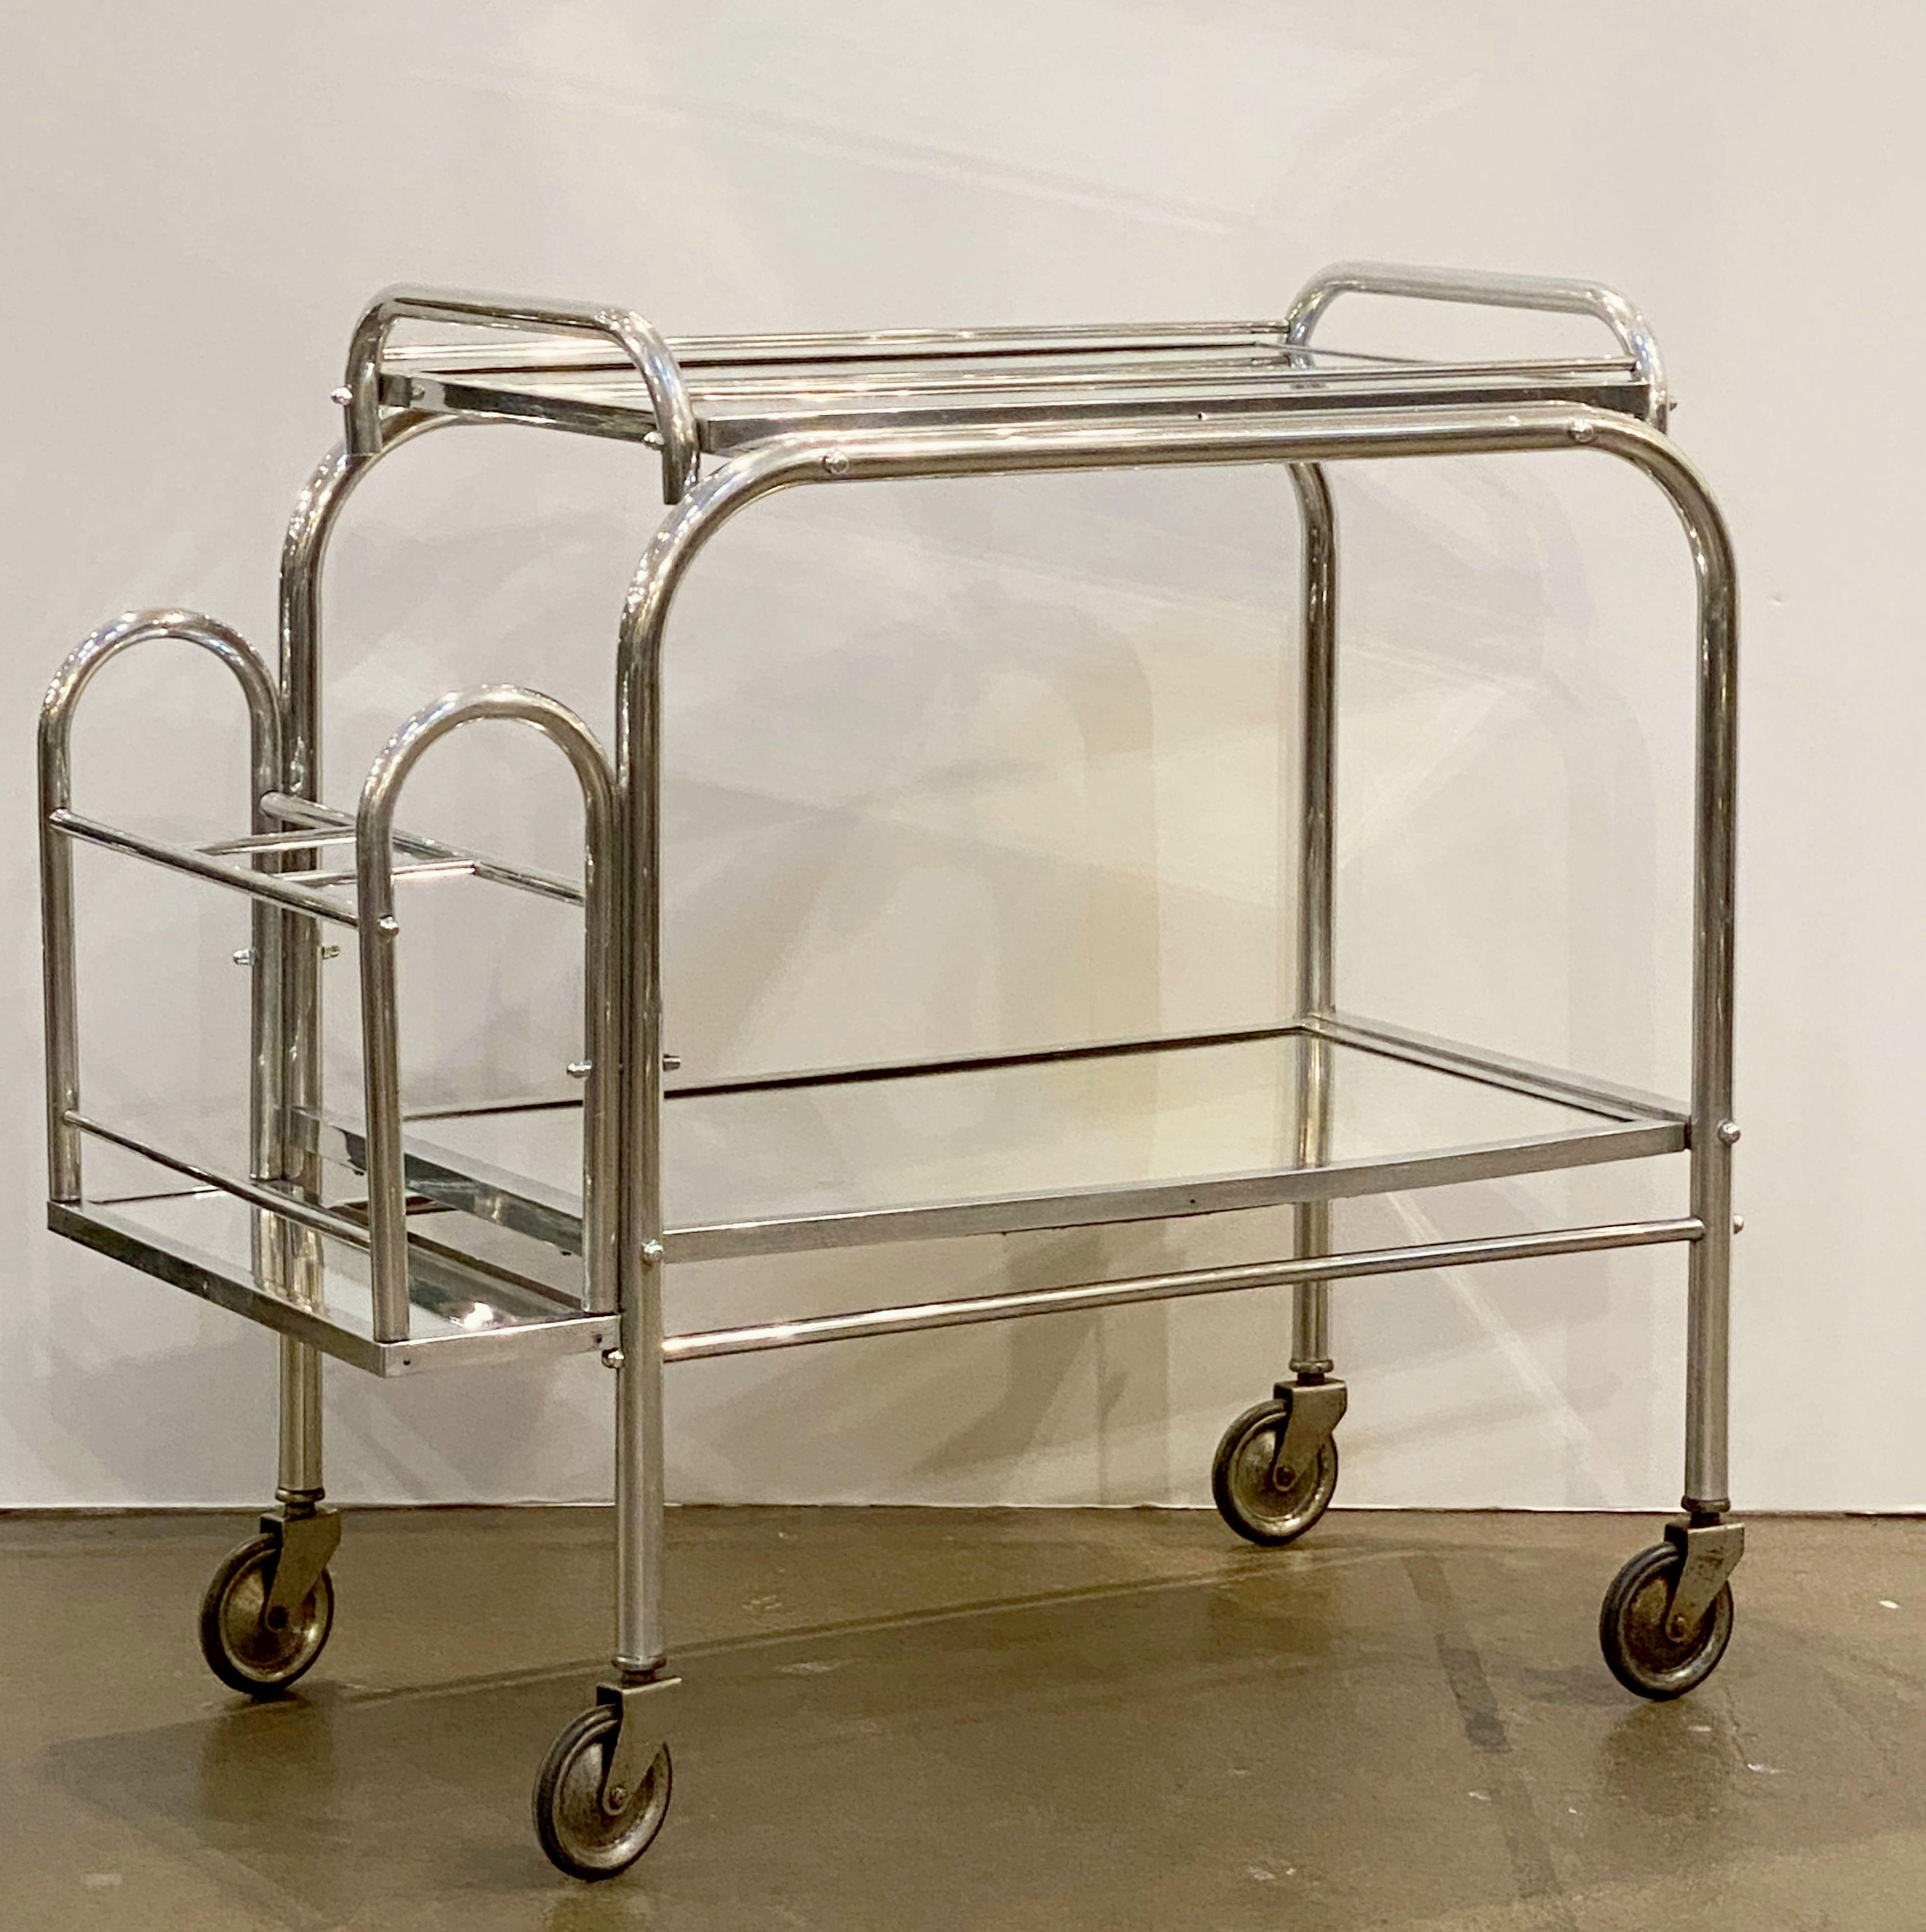 20th Century English Art Deco Rolling Drinks Cart of Brushed Aluminum and Glass